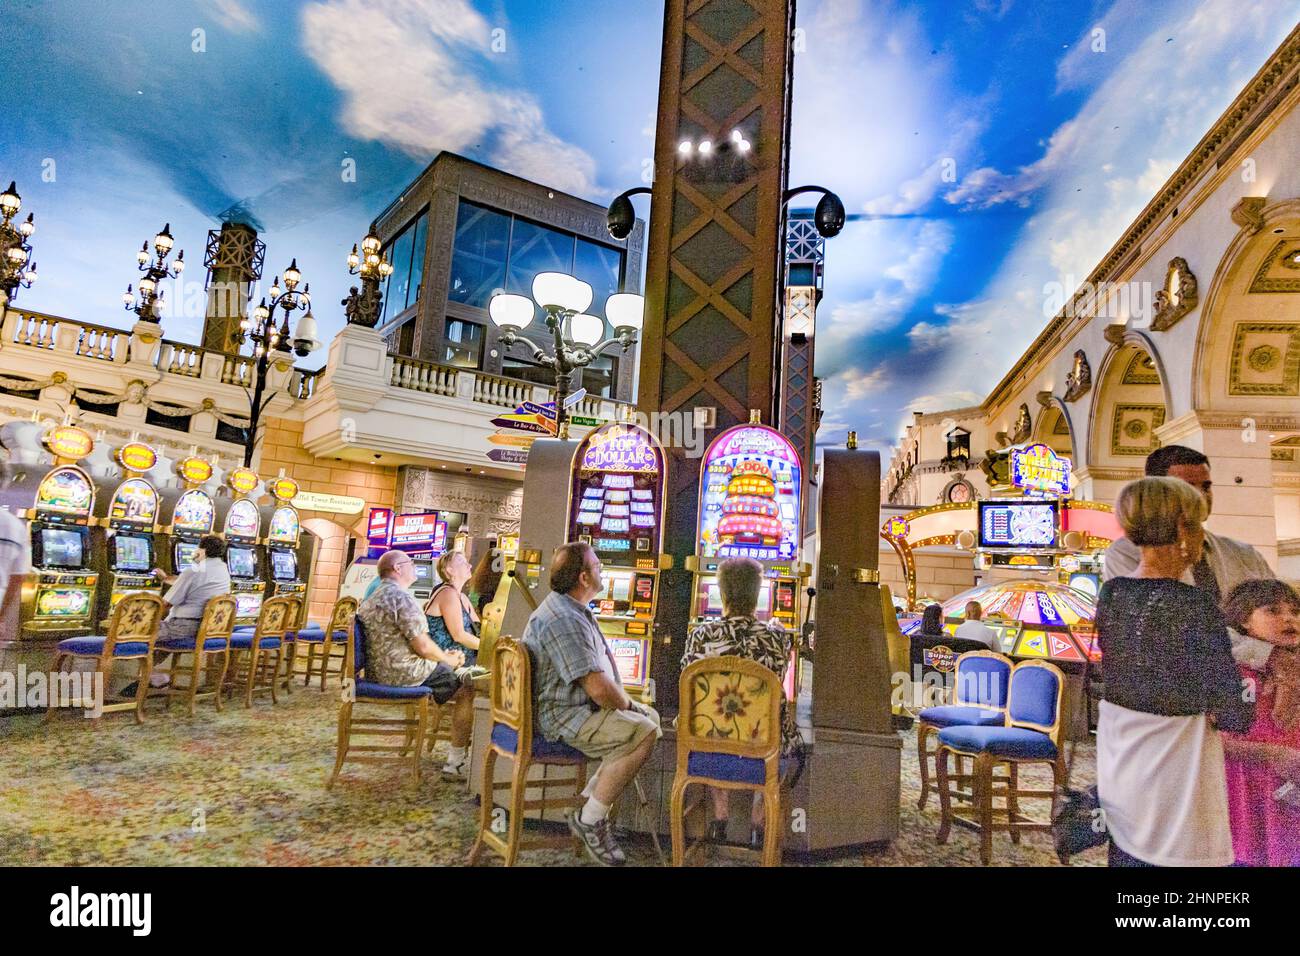 Gamblers sitting i the casino playing with slot machines Stock Photo